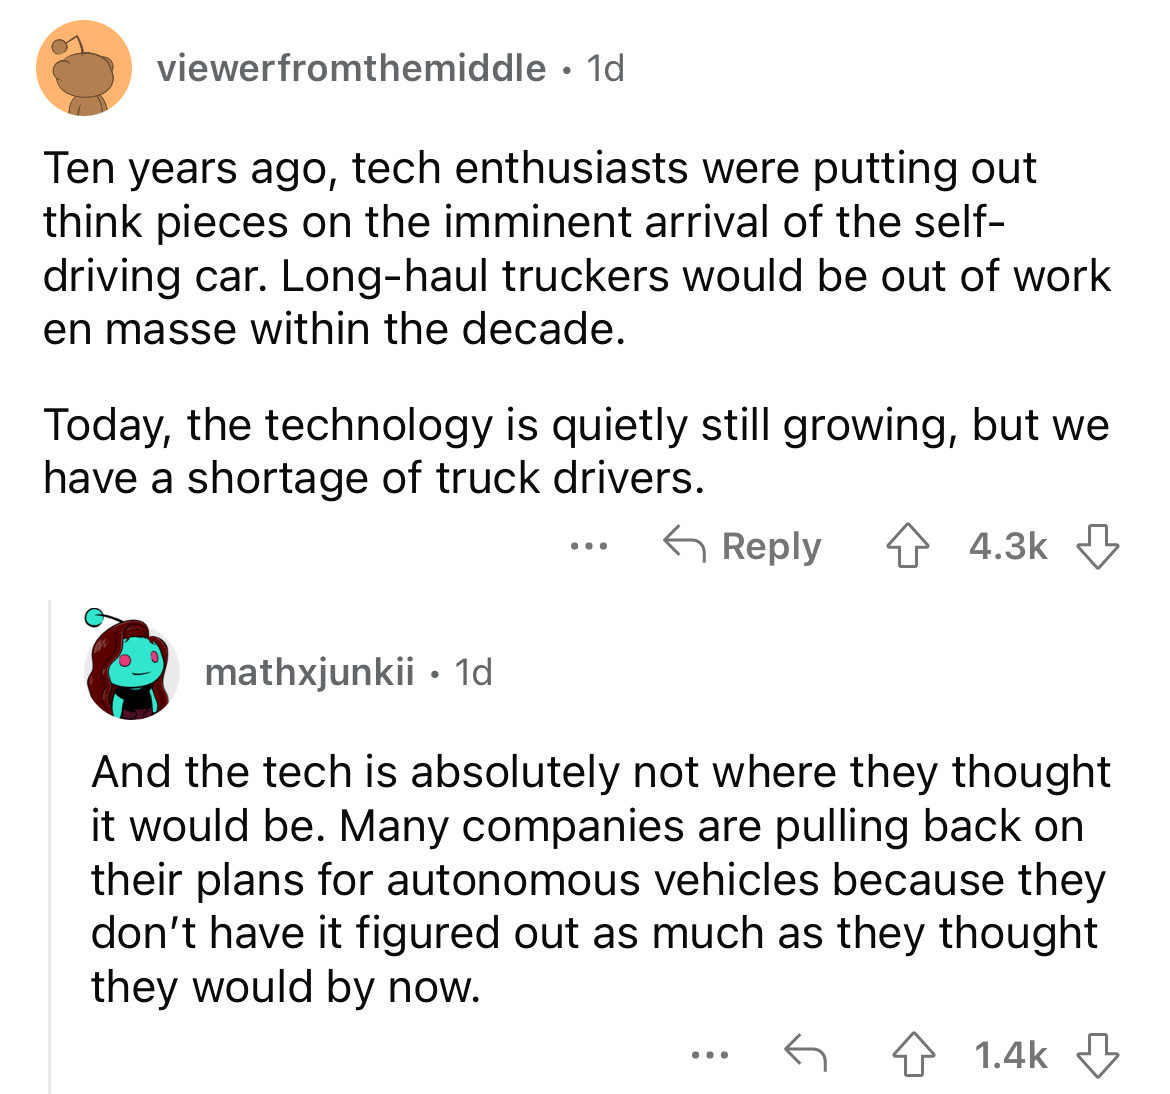 angle - viewerfromthemiddle 1d Ten years ago, tech enthusiasts were putting out think pieces on the imminent arrival of the self driving car. Longhaul truckers would be out of work en masse within the decade. Today, the technology is quietly still growing